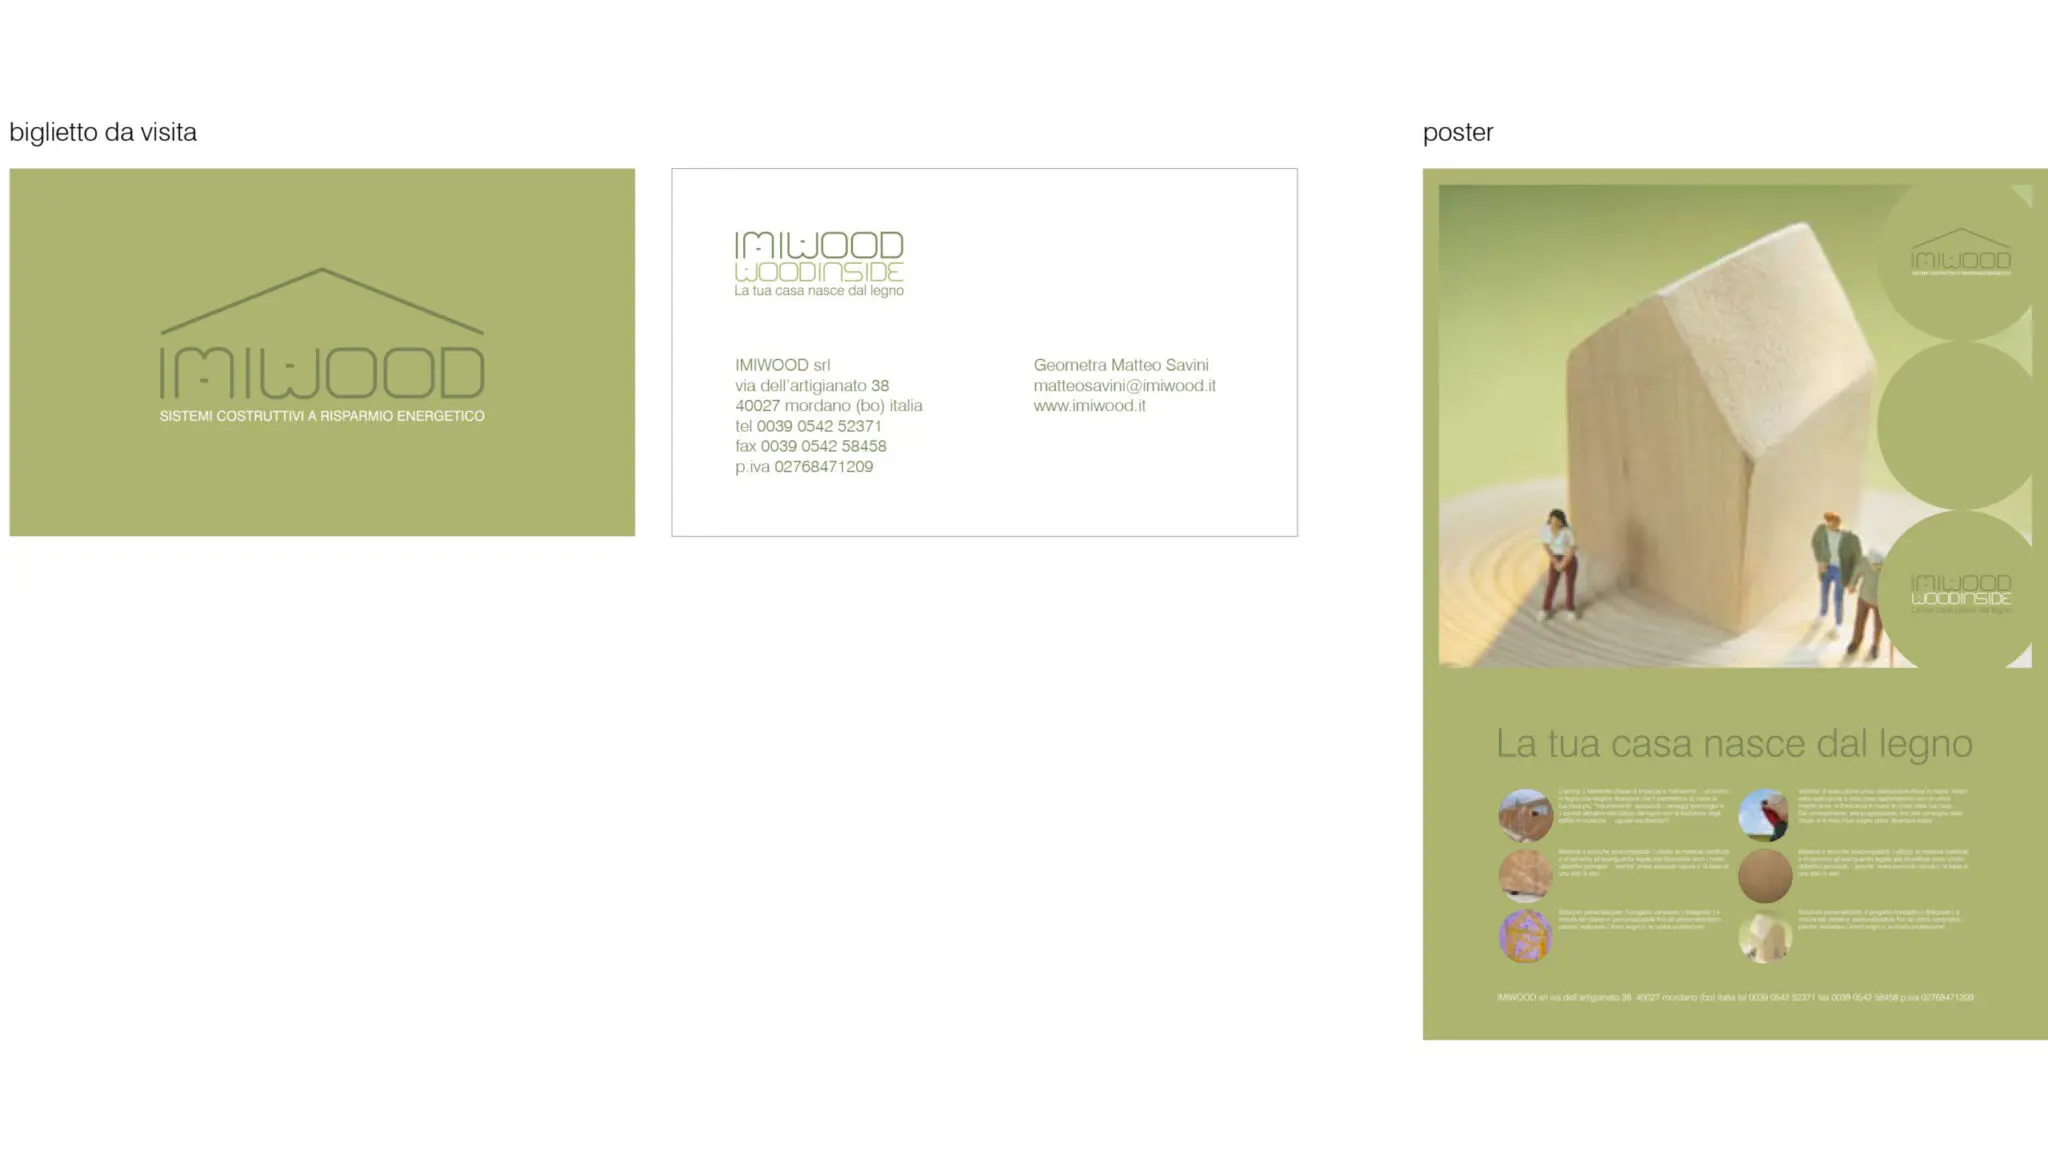 Imiwood-immagine-business-card